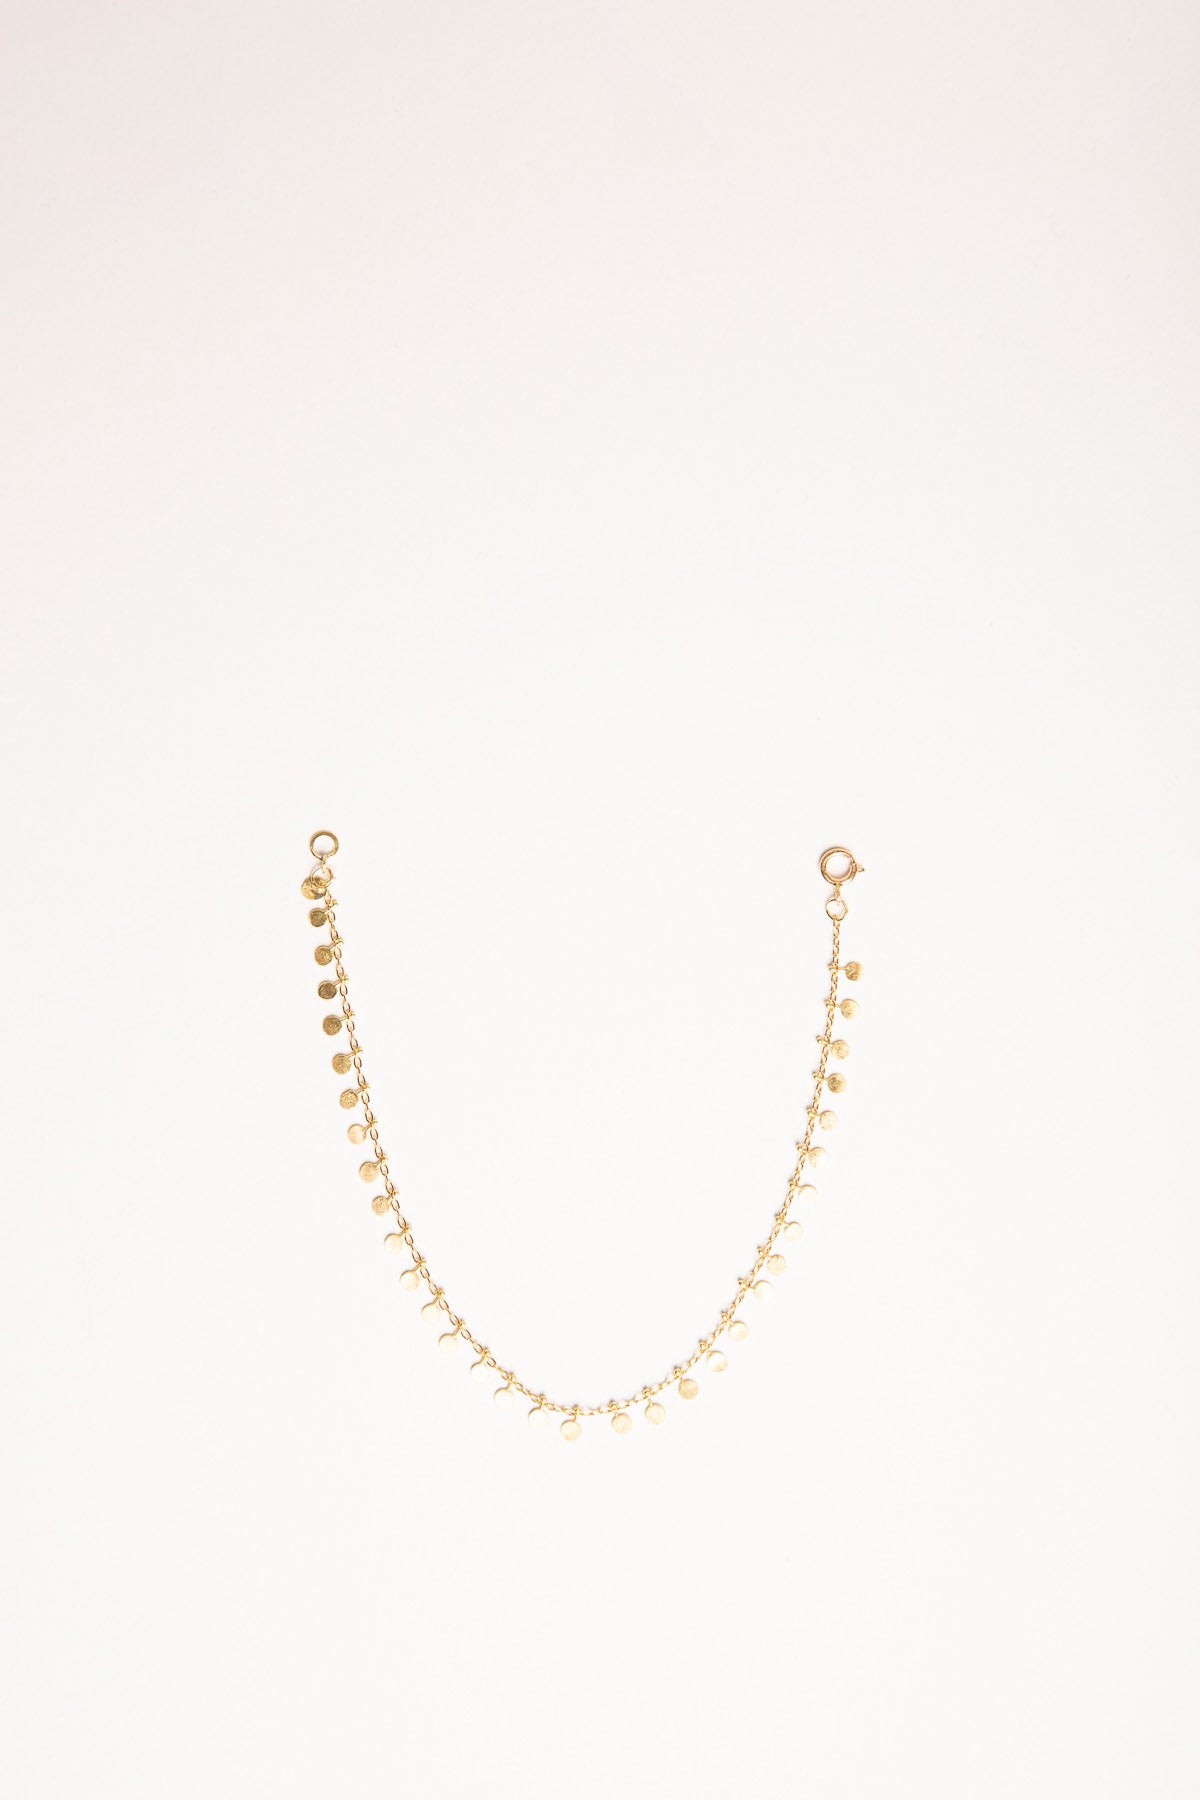 SIA TAYLOR | EVENLY DOTTED GOLD BRACELET